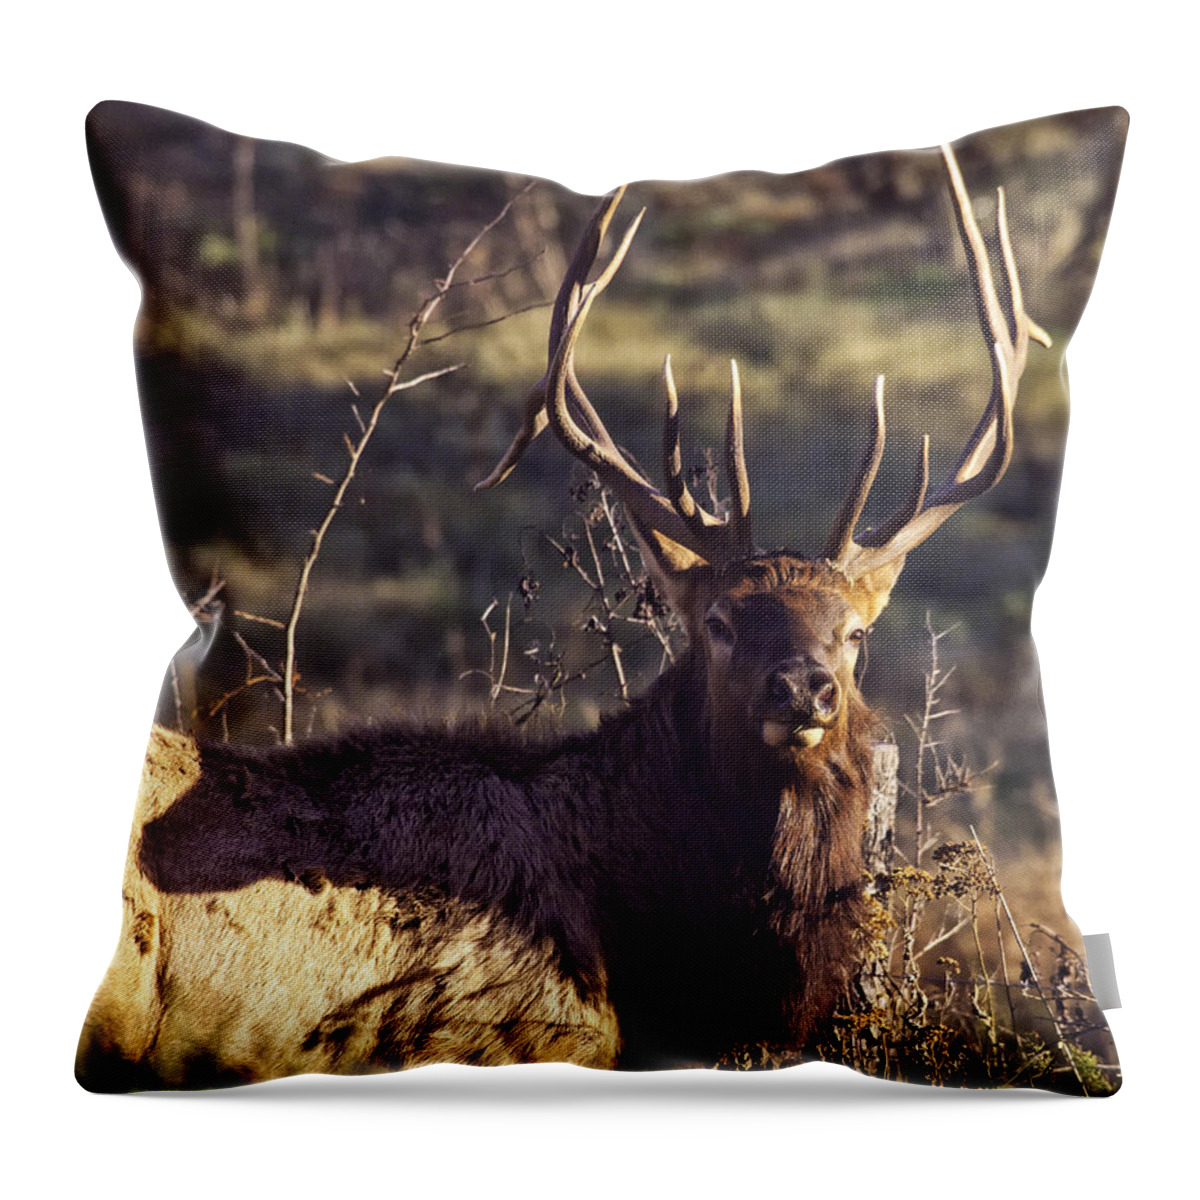 Bull Elk Throw Pillow featuring the photograph Twin Forks Up Close by Michael Dougherty